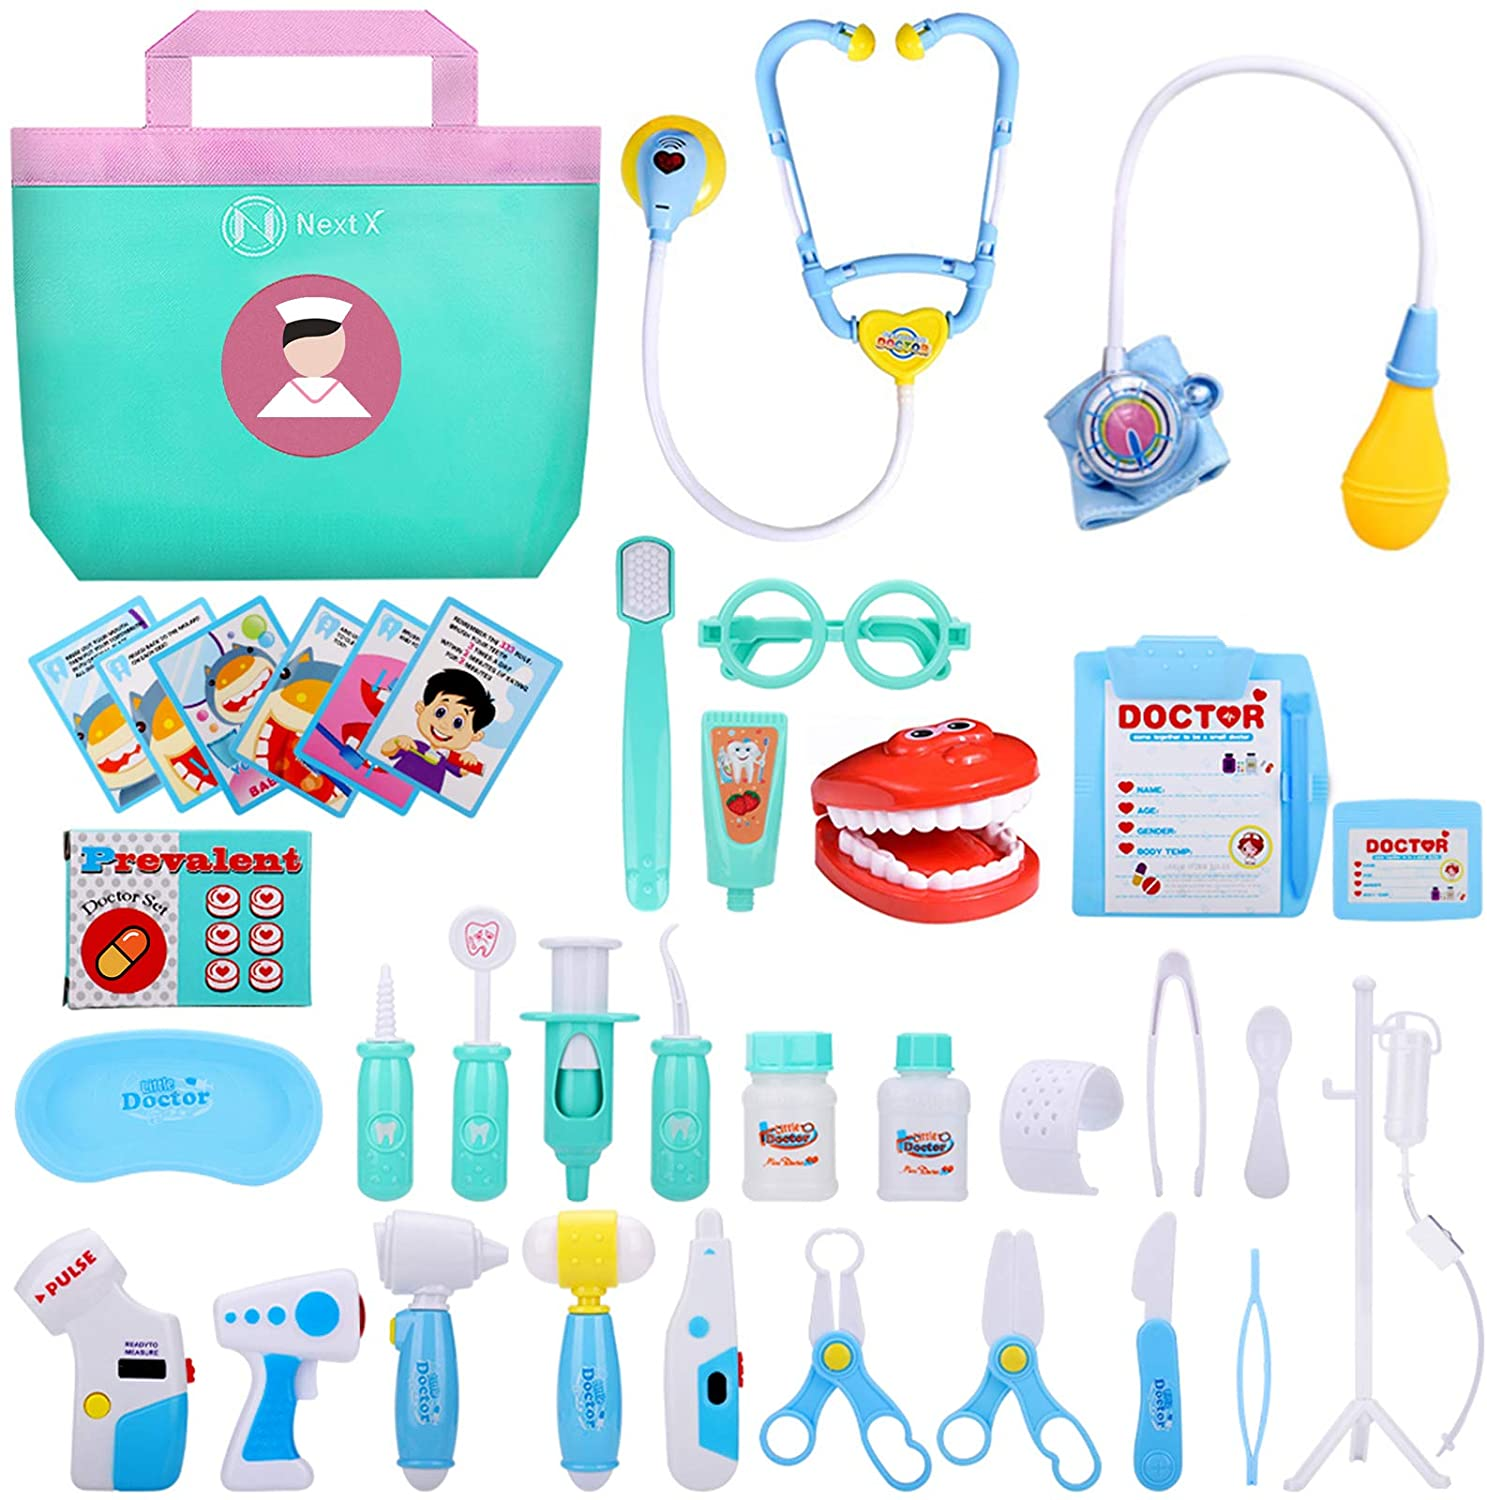 NextX Kids Doctor kit, Toddler Pretend Dress up Play Set Games Learning and Education for 1-3 Years Old, 38 pcs Toy Medical Kits with Stethoscope, Doc Coat, Gifts Denti $12.99